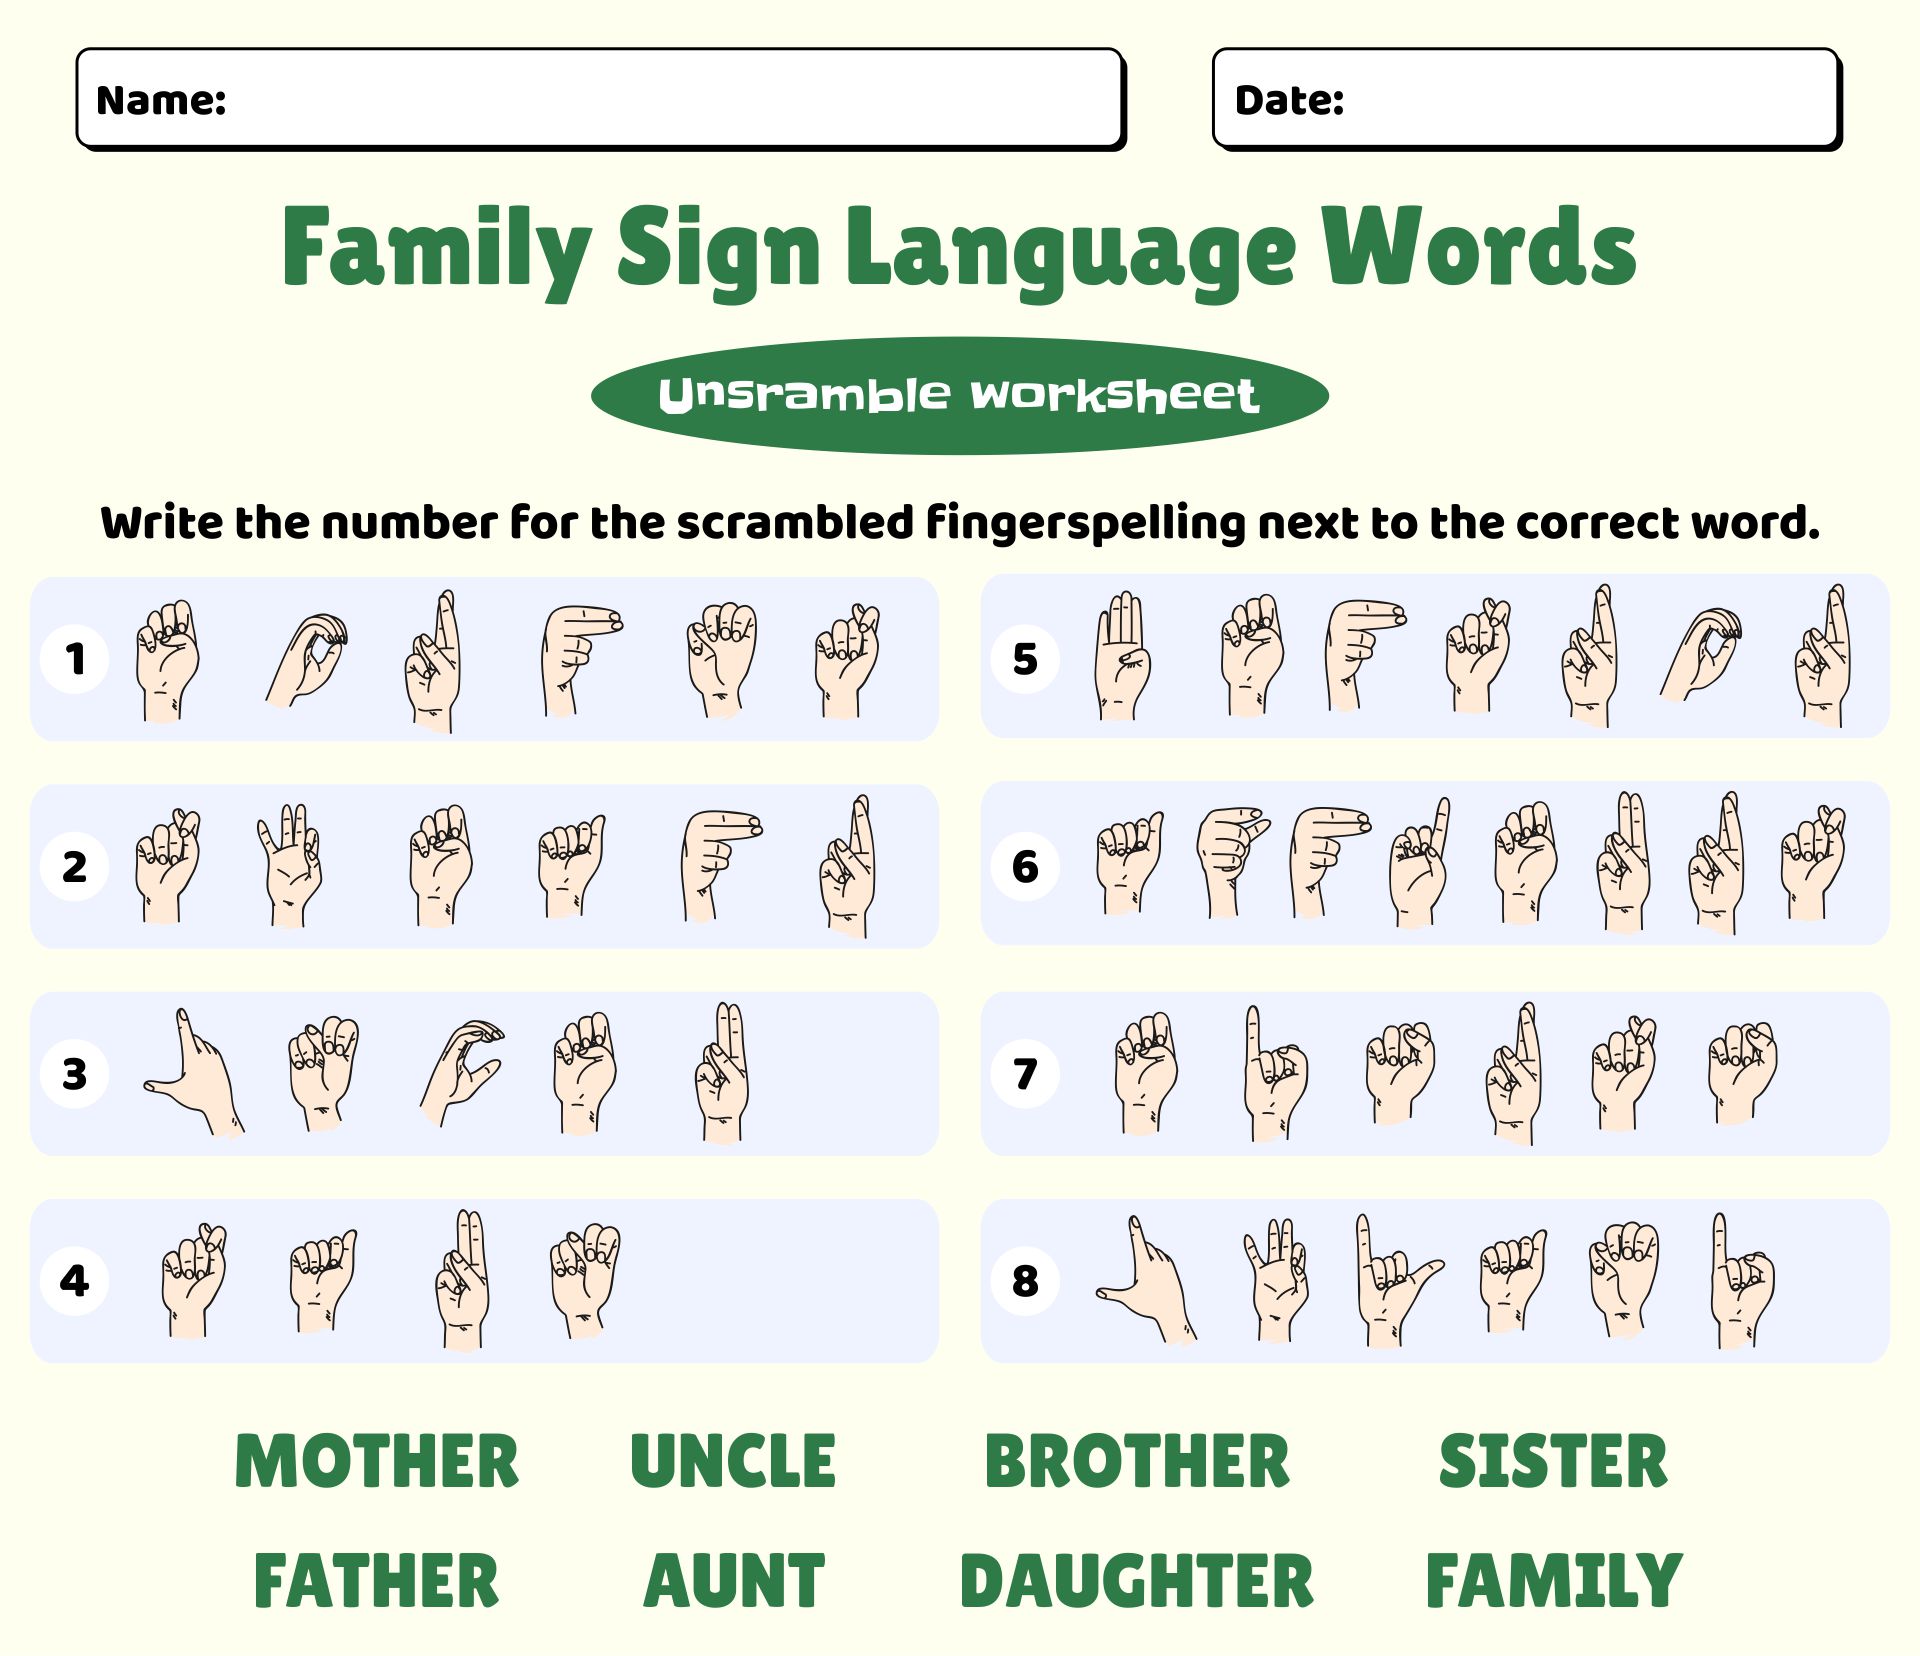 4-best-images-of-sign-language-words-printable-worksheets-sign-language-words-worksheet